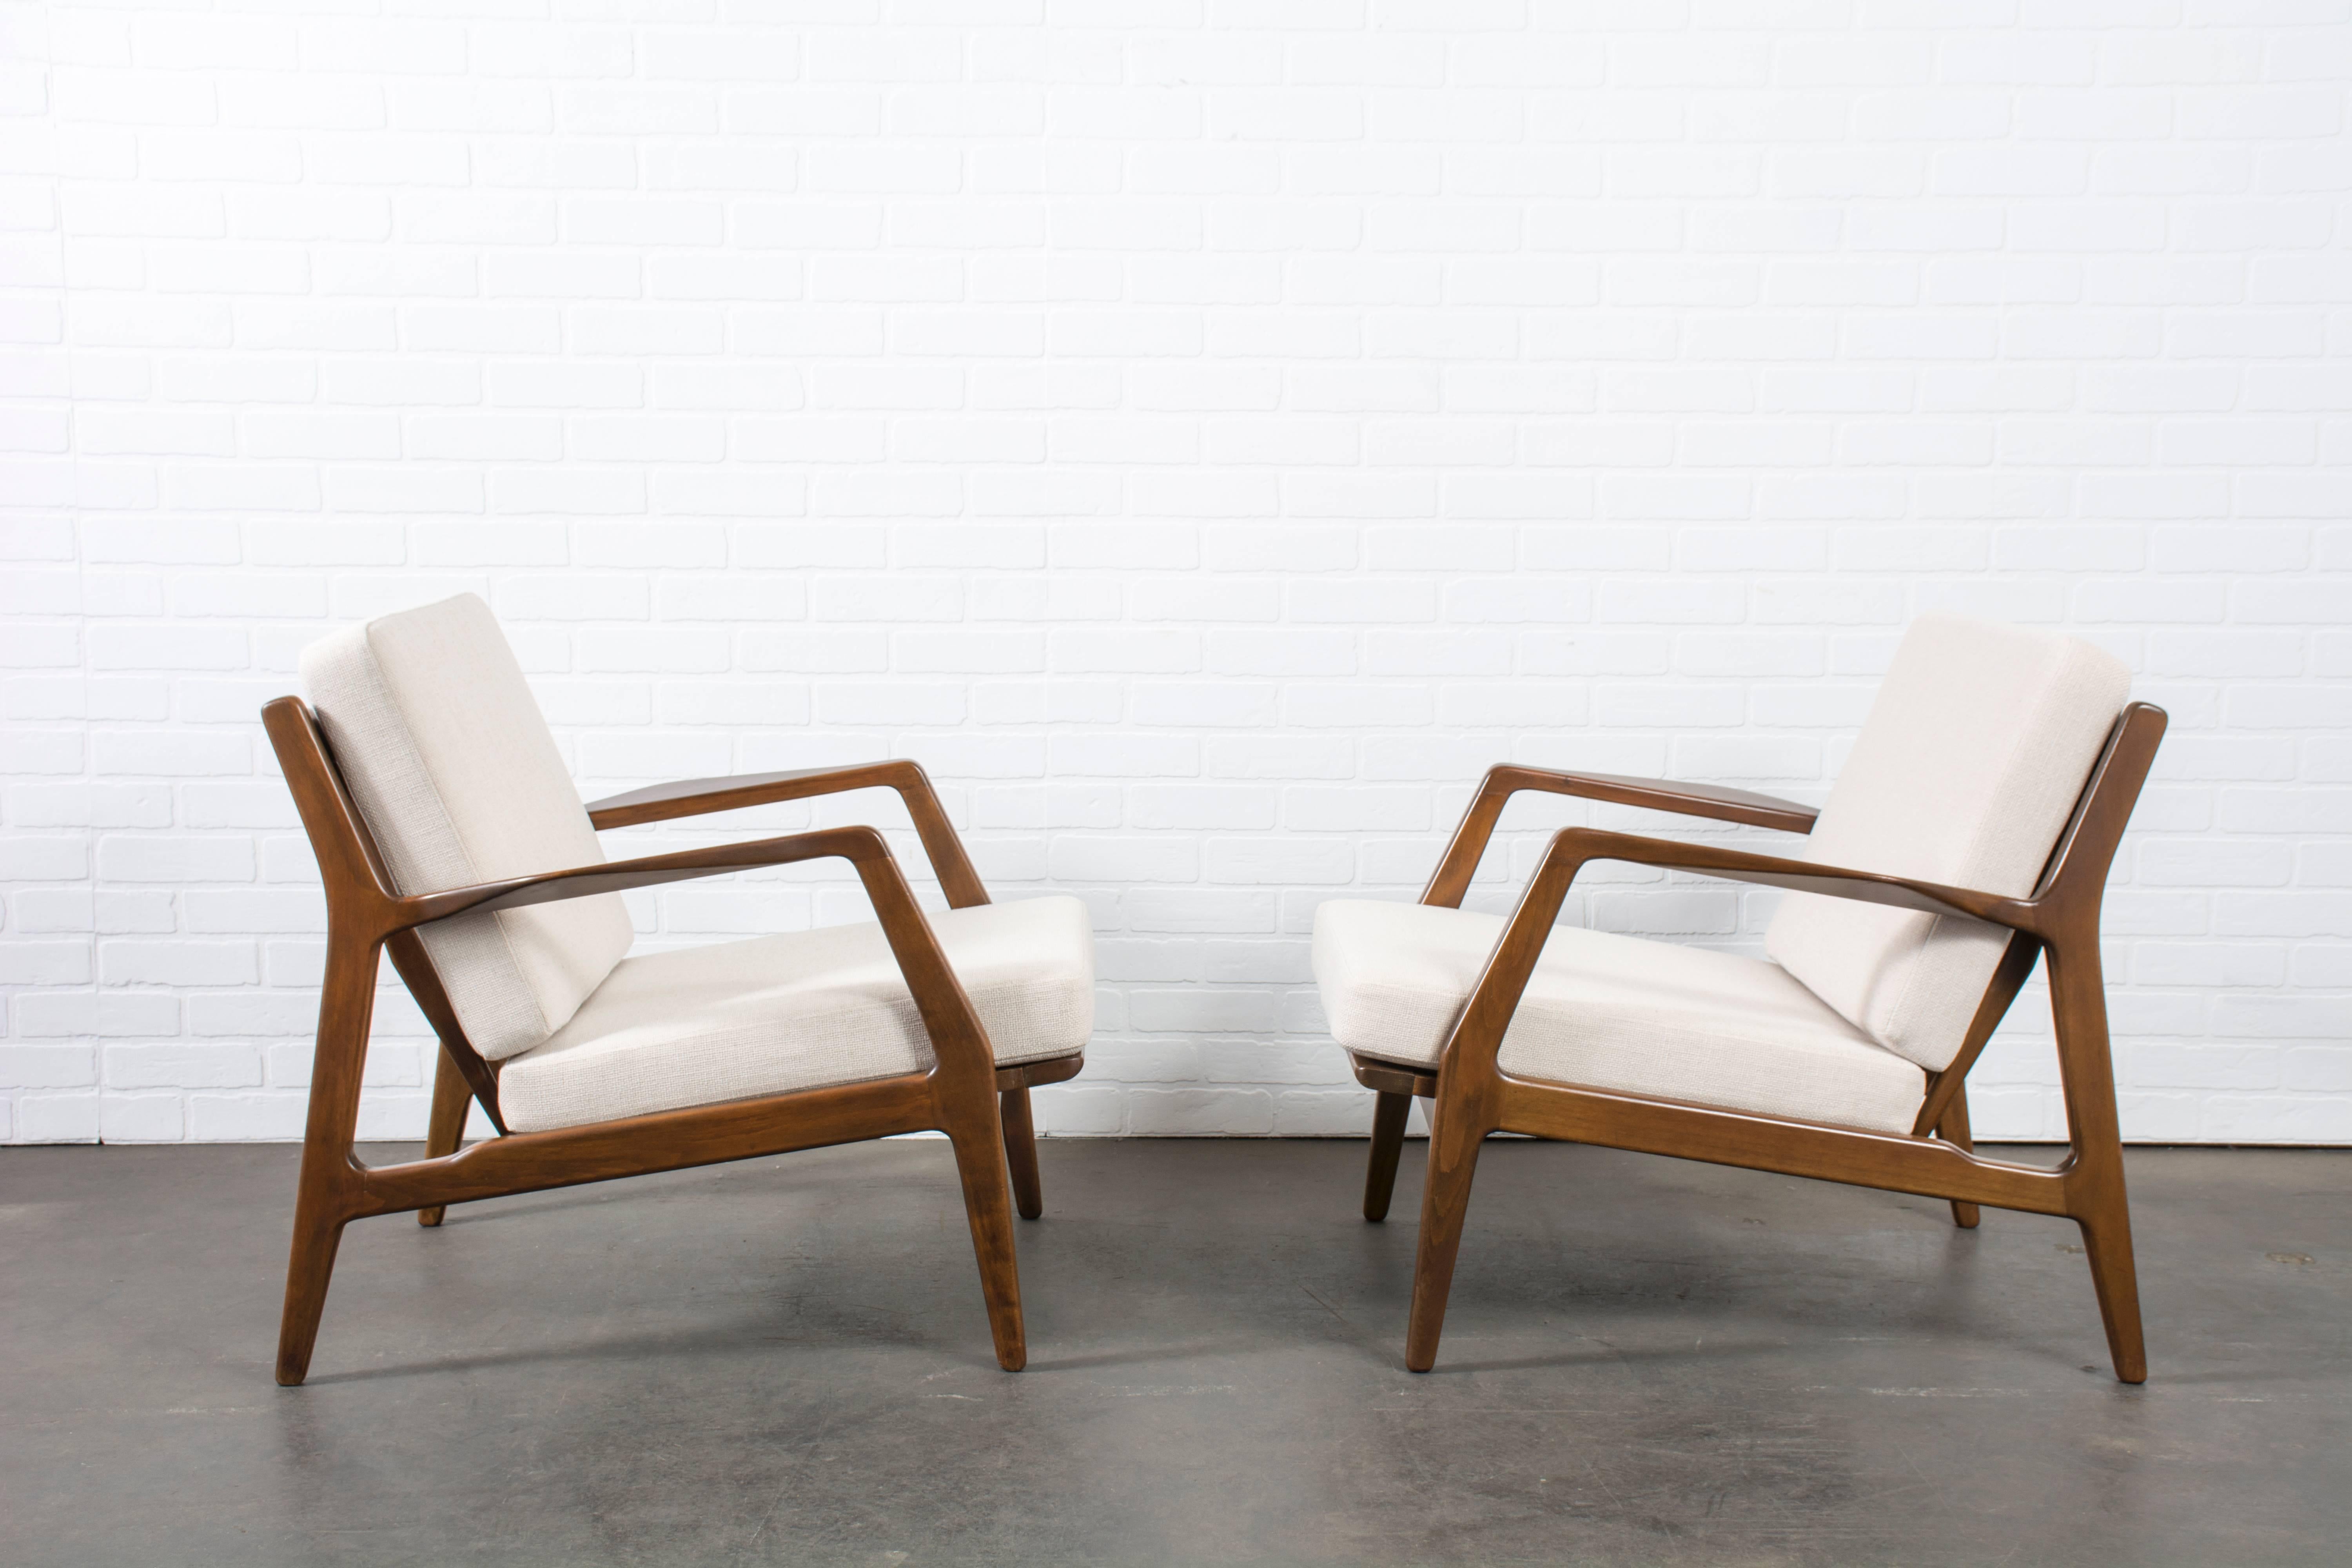 This is a pair of vintage Mid-Century lounge chairs by Ib Kofod Larsen. The frames have a walnut finish. Original straps. New cushions and upholstery.